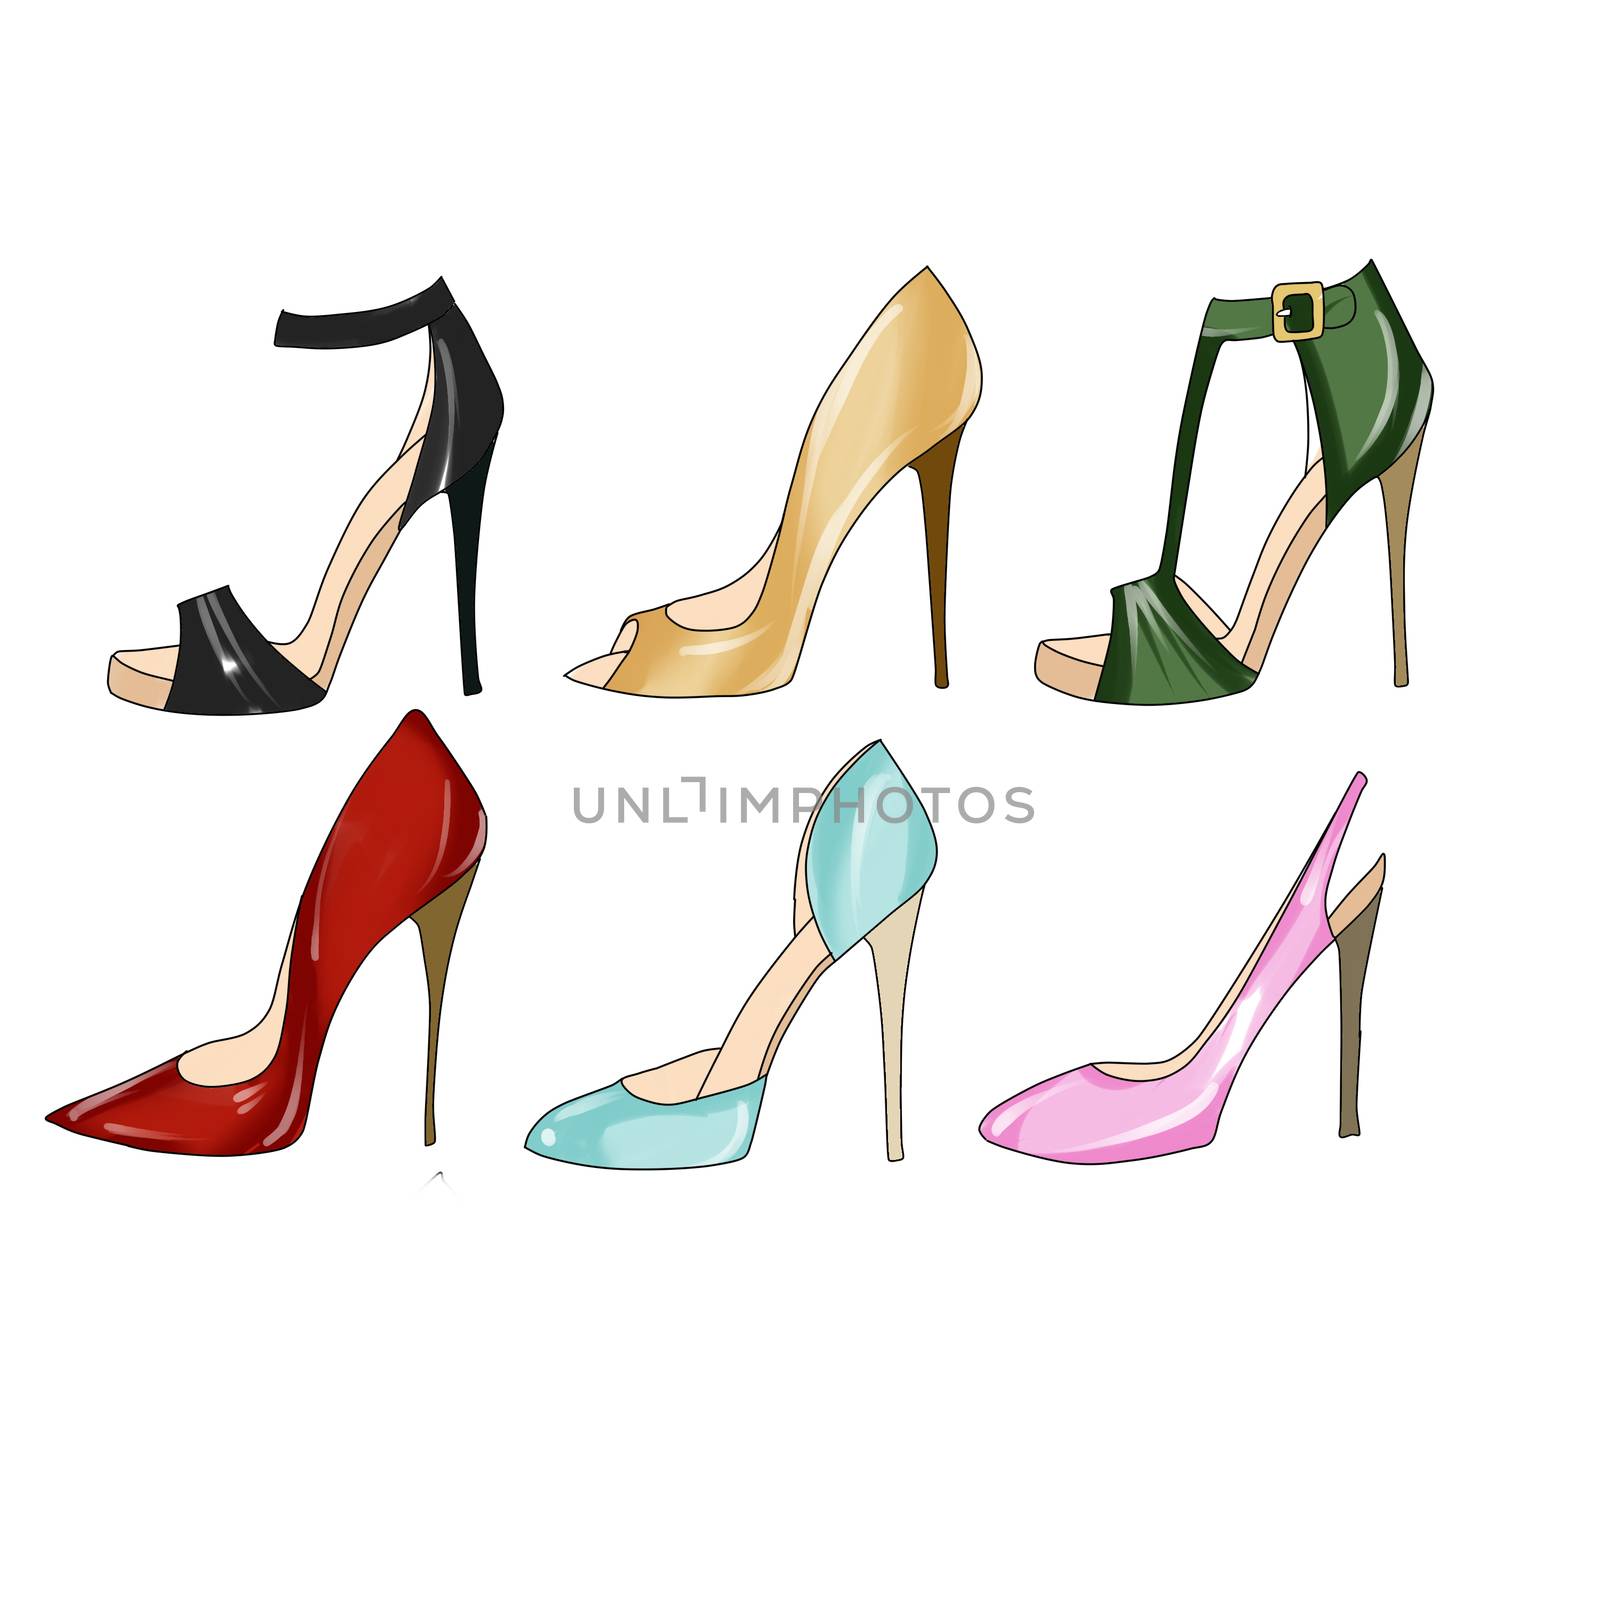 Fashion Illustration - Set of different types of heel shoes by GGillustrations